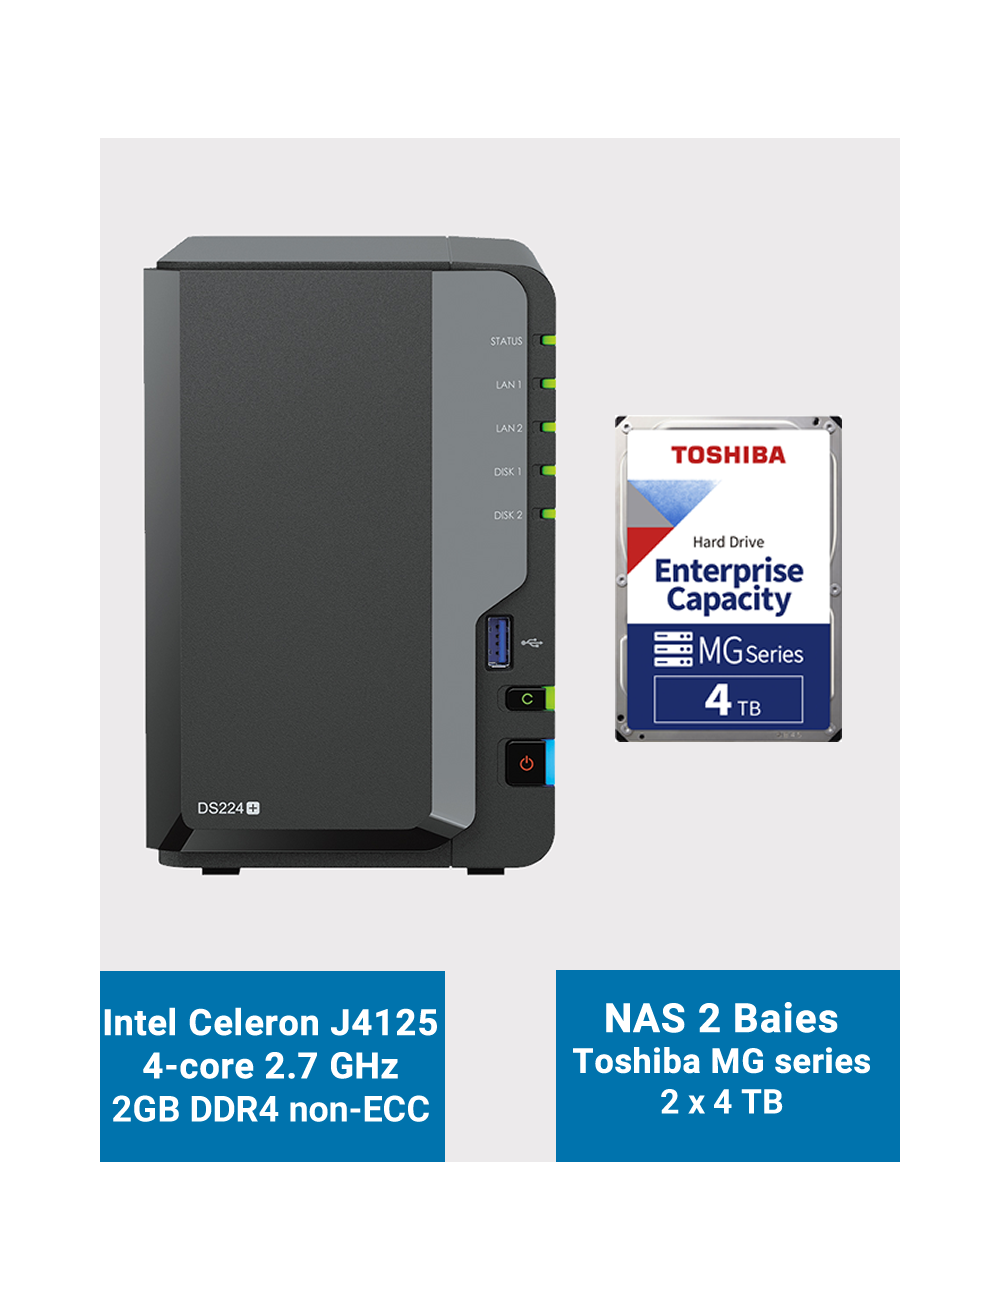 Synology DiskStation DS224+ 2Go Serveur NAS Toshiba MG series 8To (2x4To)